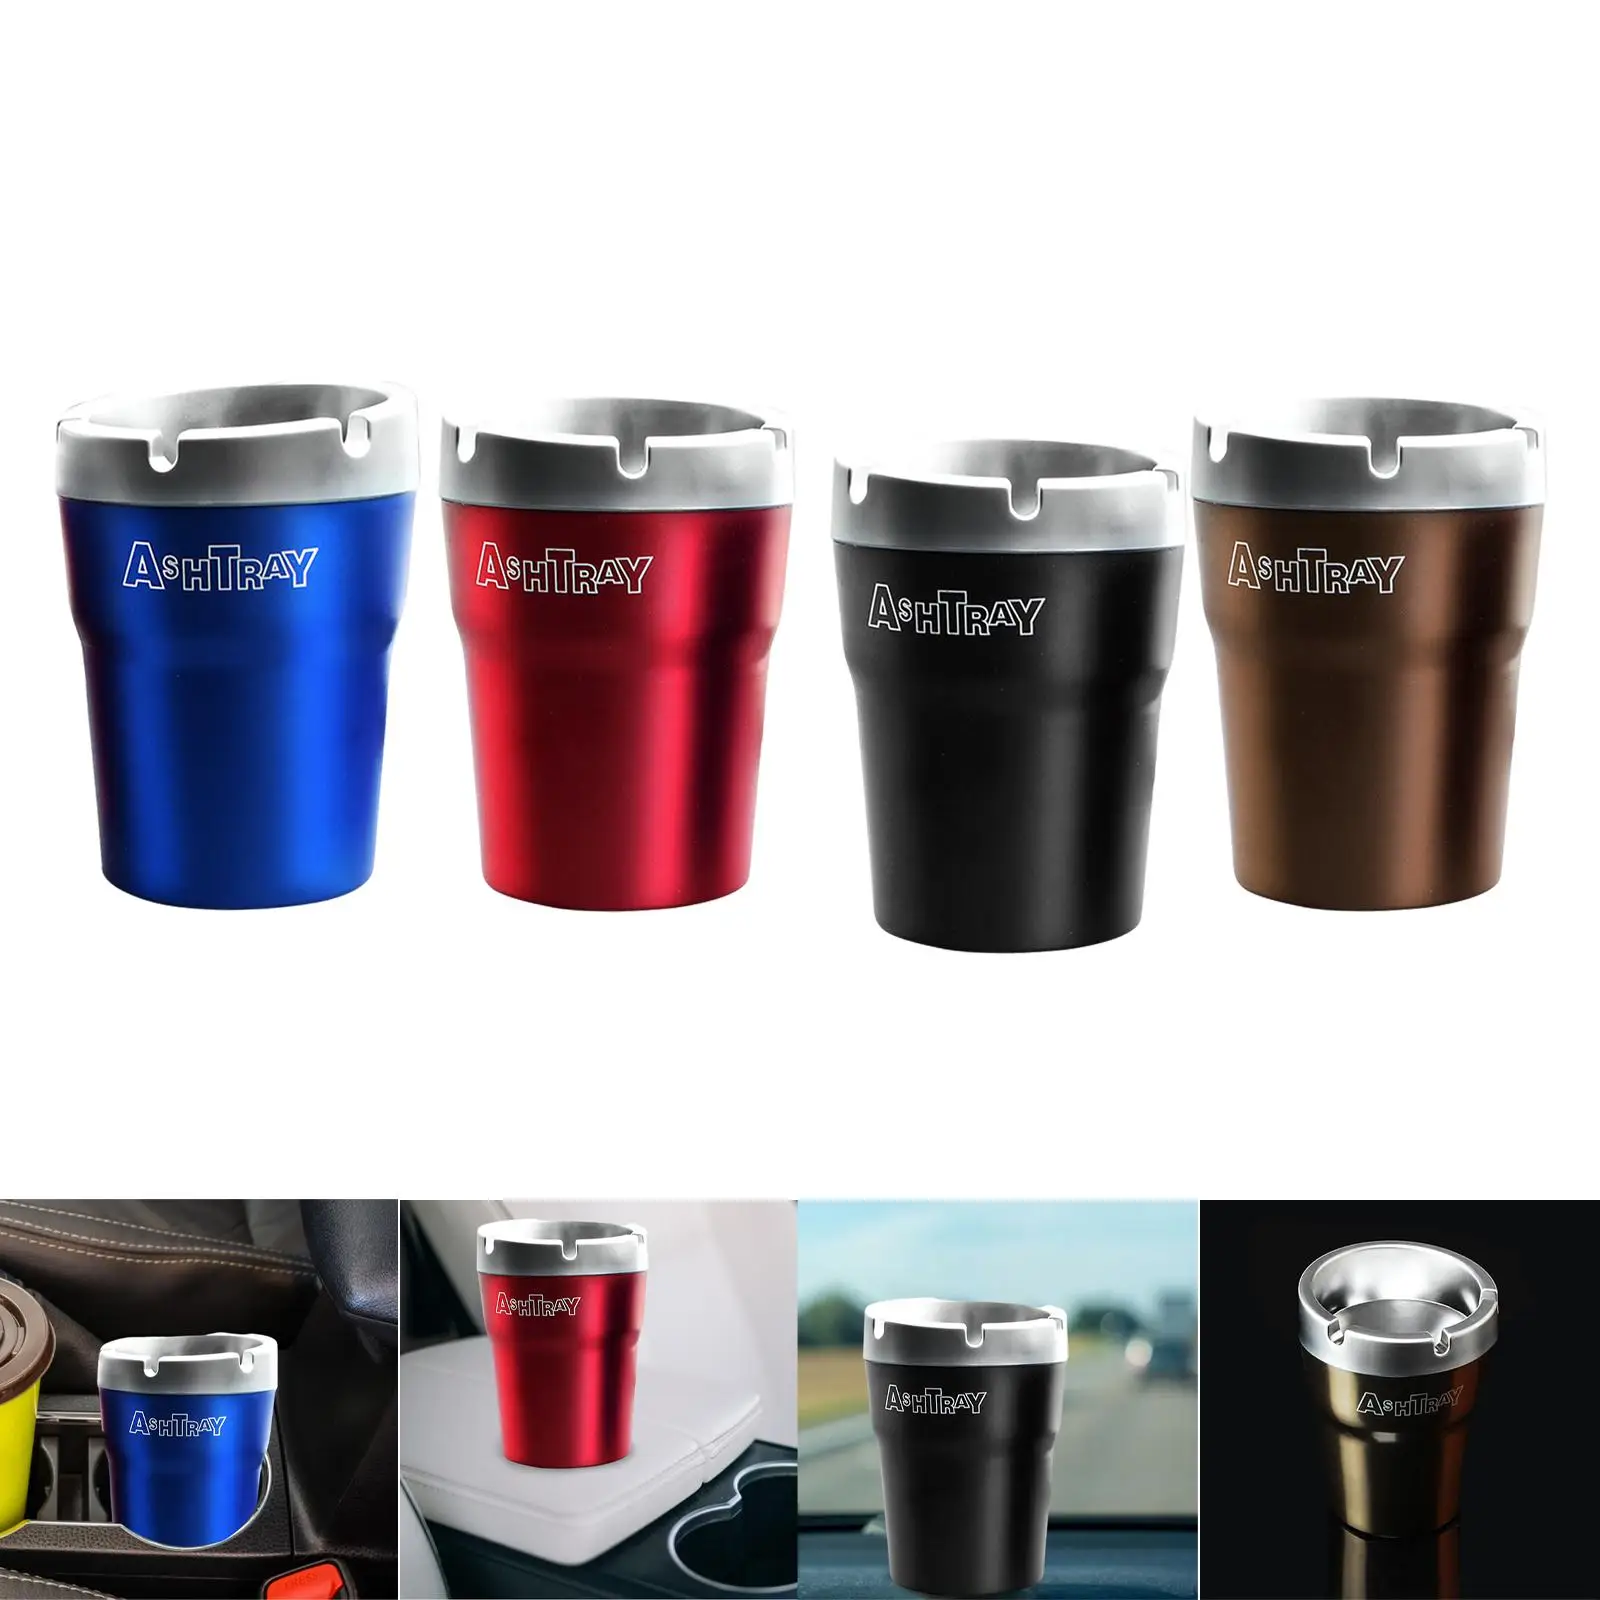 Detachable Car Ashtray Stylish Creative Car Trash Can Cup Holder with Lid Windproof Cigarette Ash Tray for Smoke Home Truck